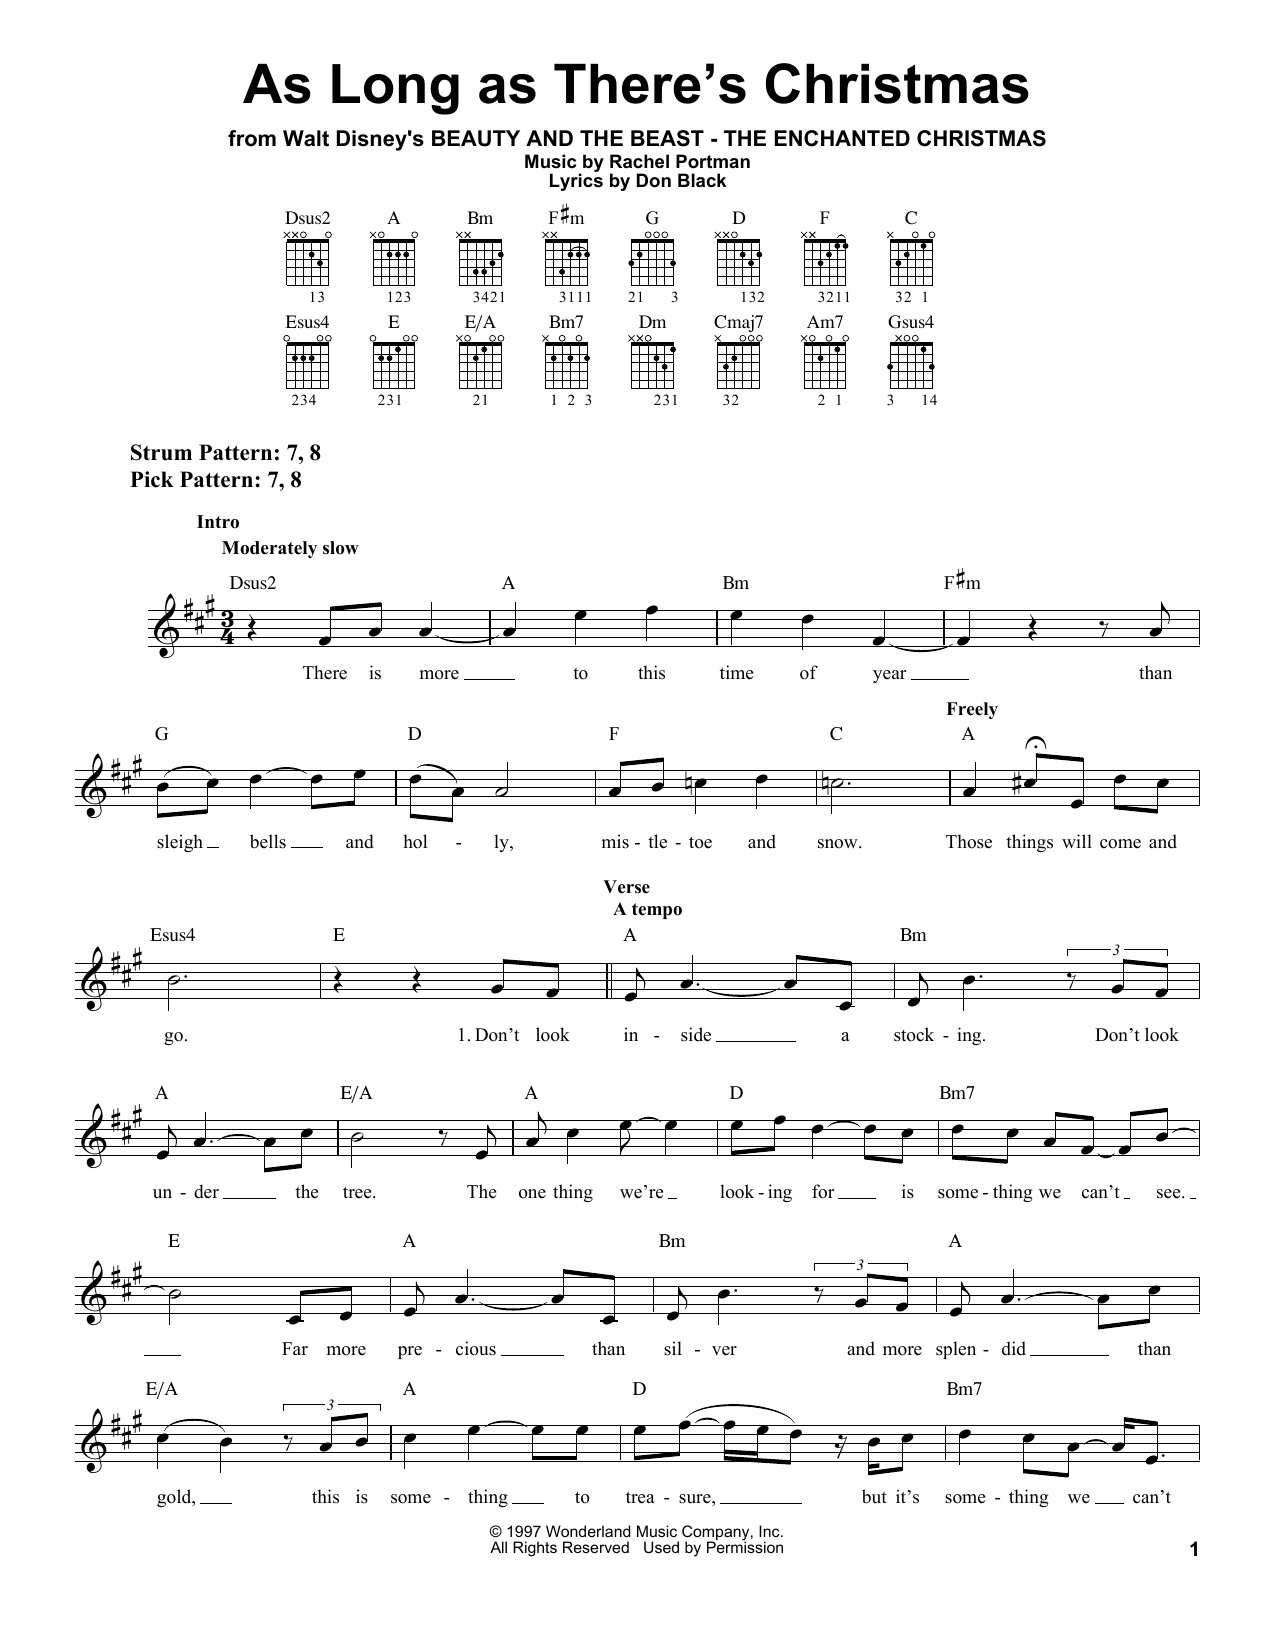 Peabo Bryson & Roberta Flack As Long As There's Christmas sheet music notes and chords. Download Printable PDF.